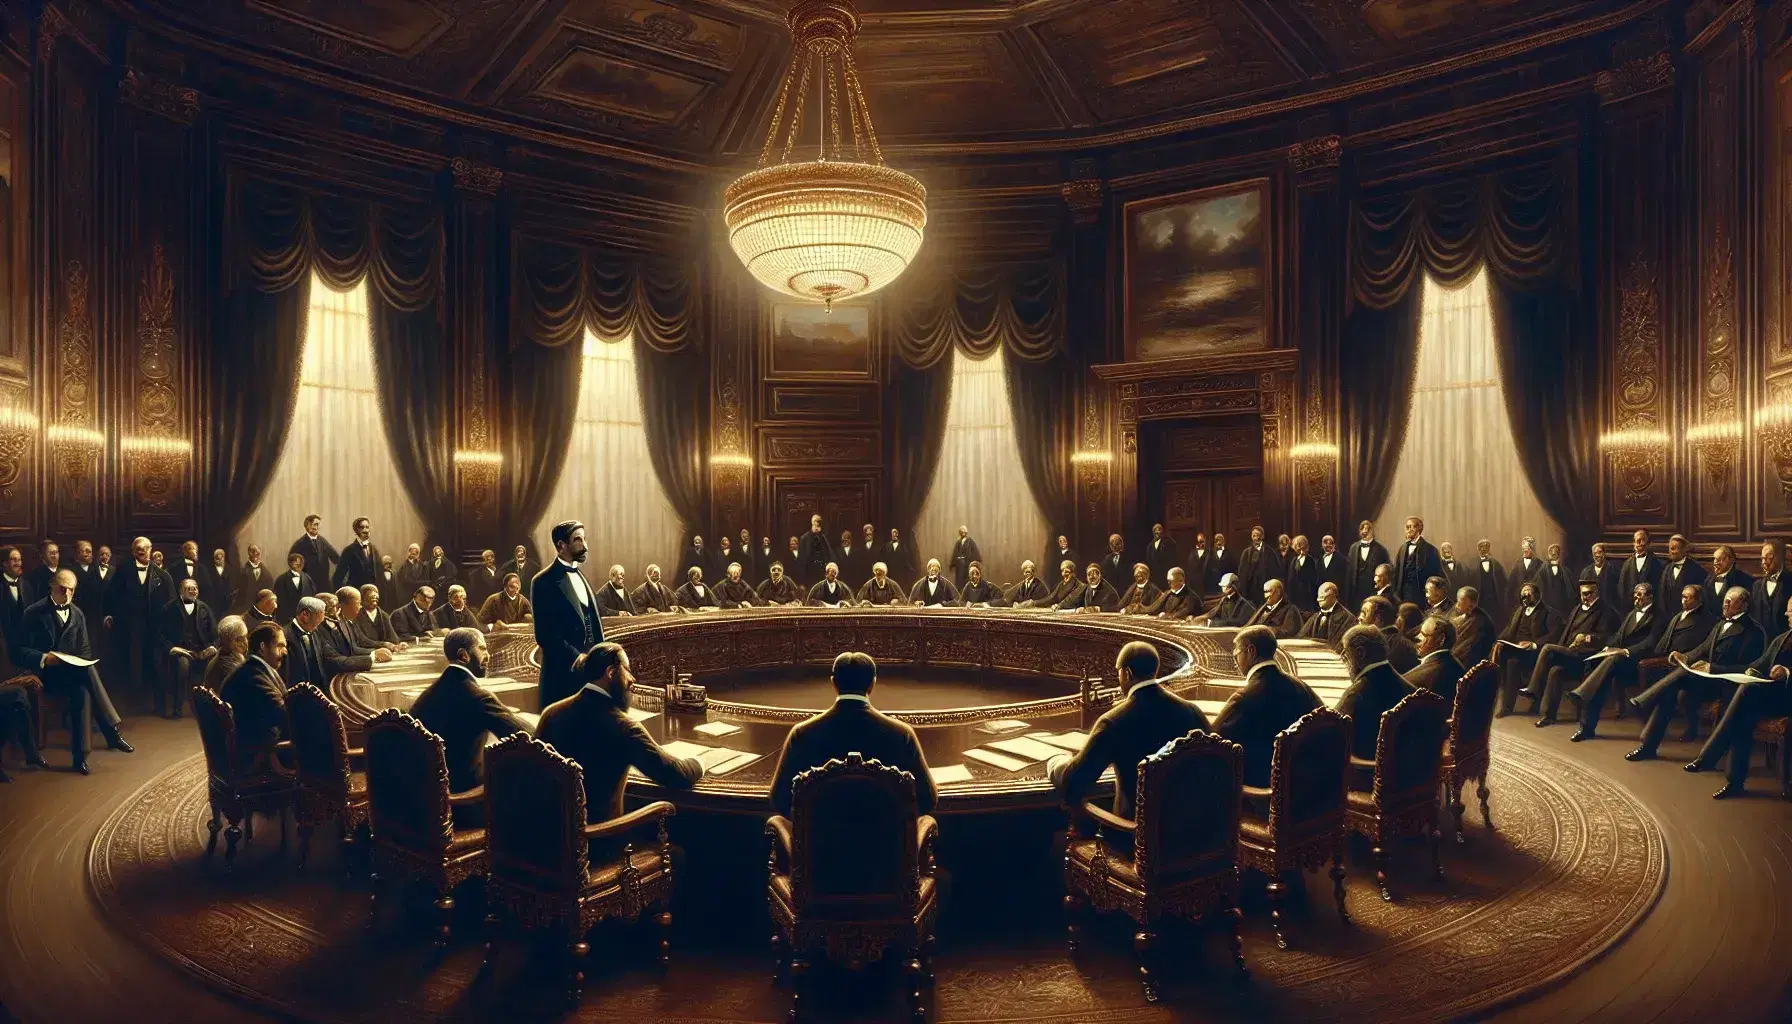 Depiction of the late 19th century Berlin Conference with men in period dress around a table lit by a chandelier.